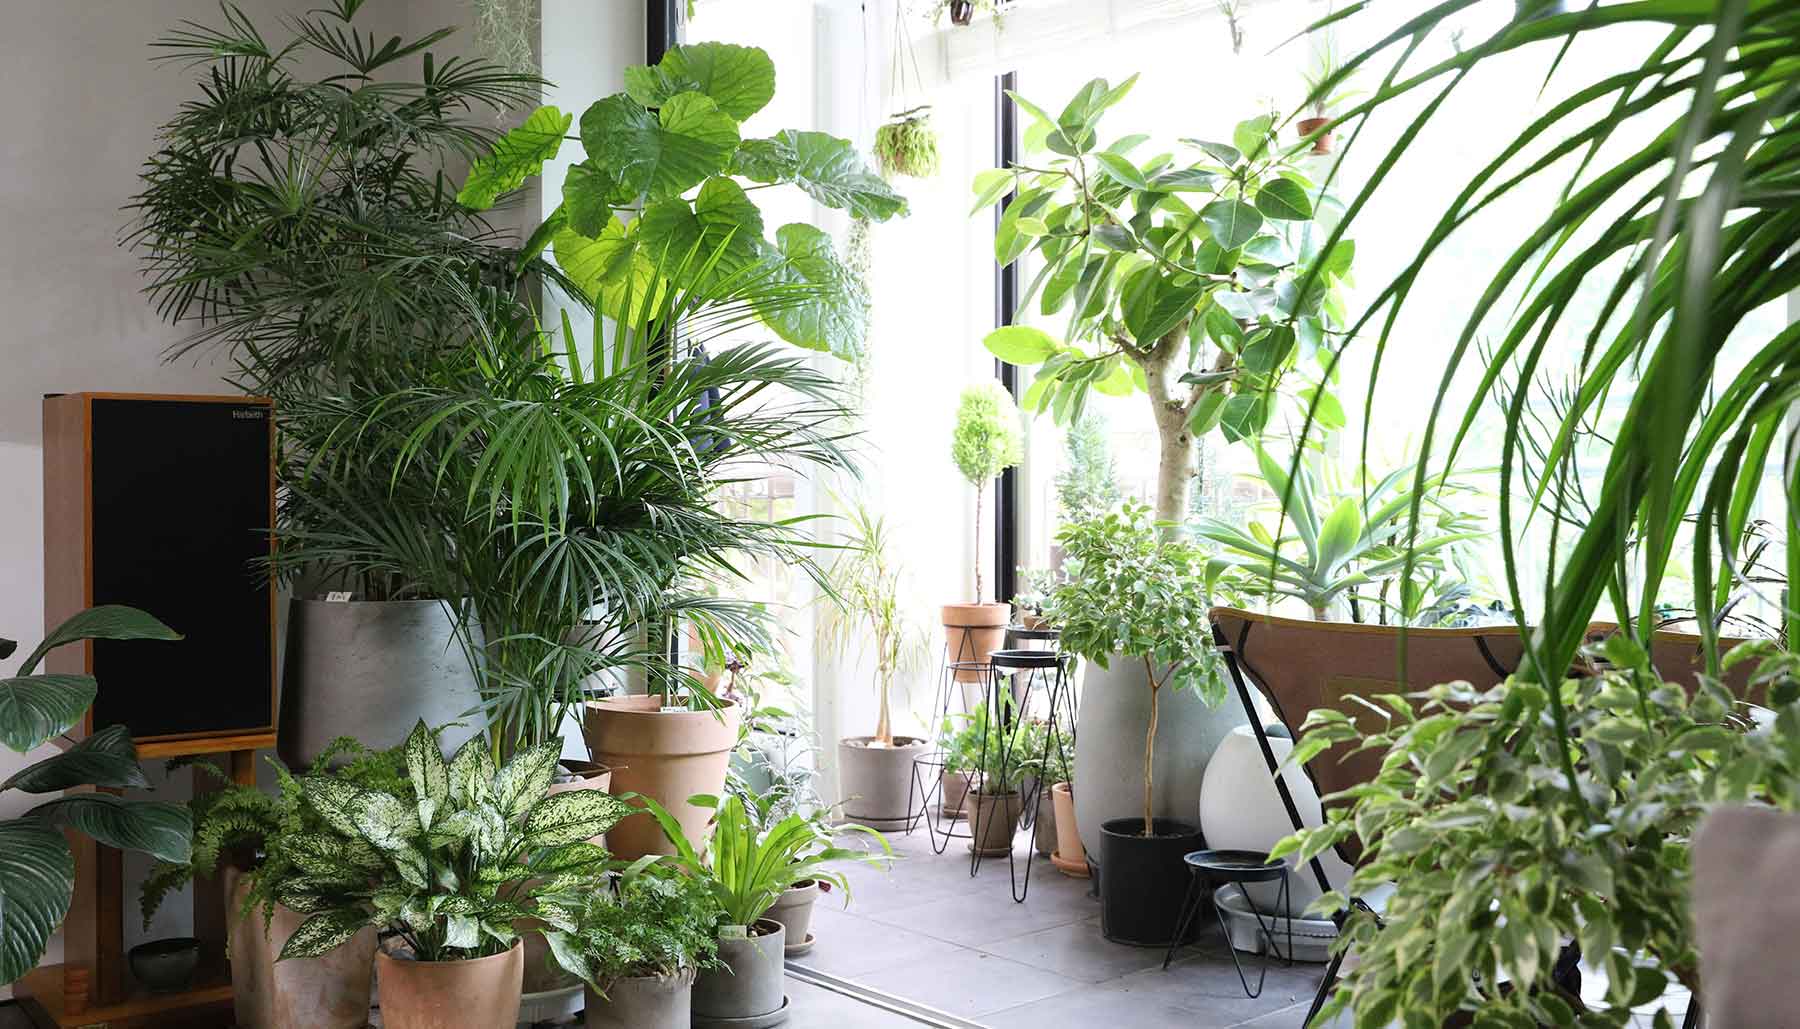 You Won't Believe How Much These Houseplants Cost!